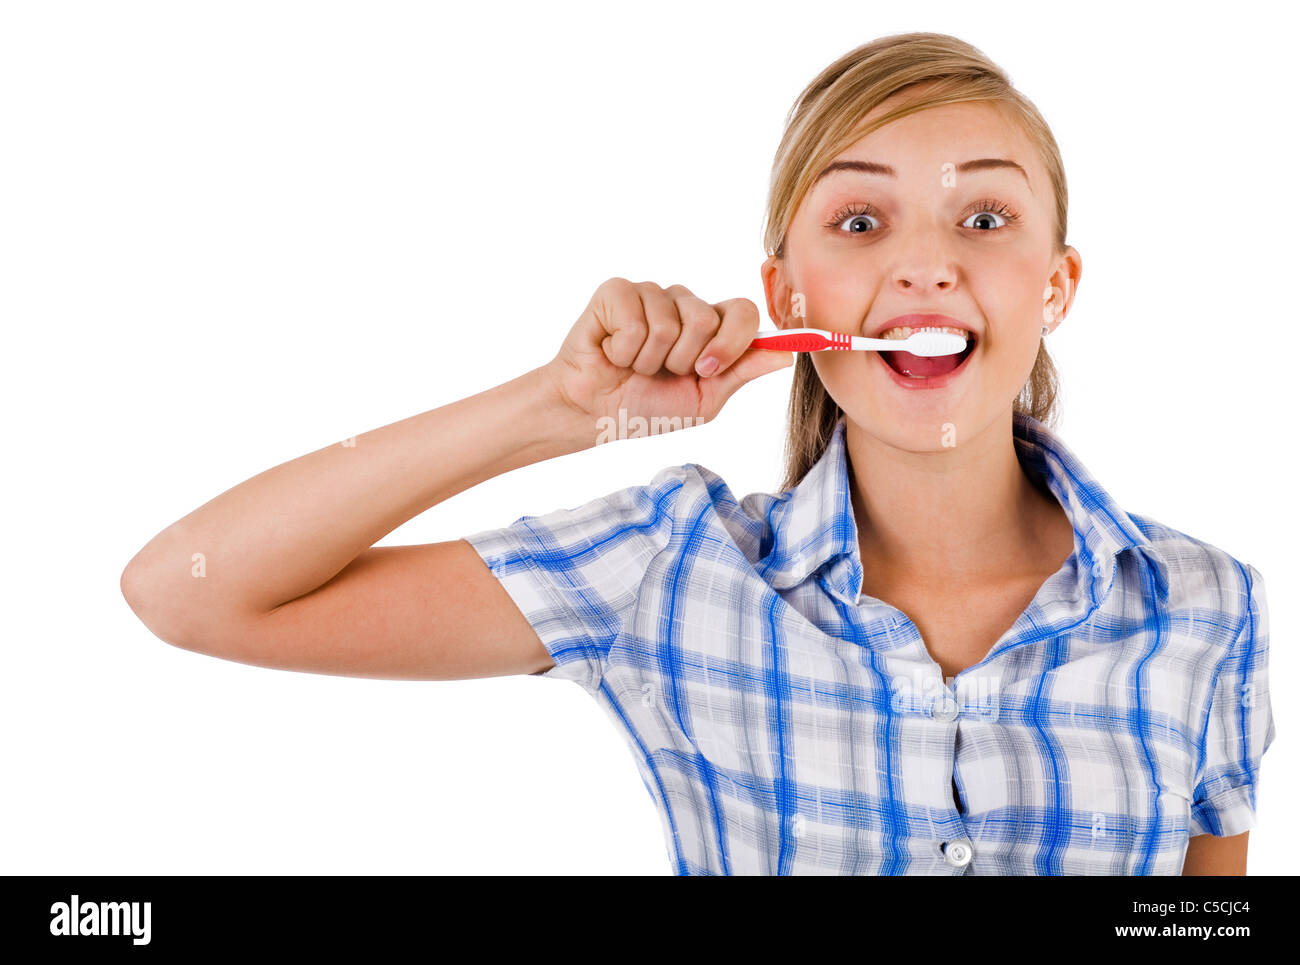 Women brushing her teeth on a white background Stock Photo